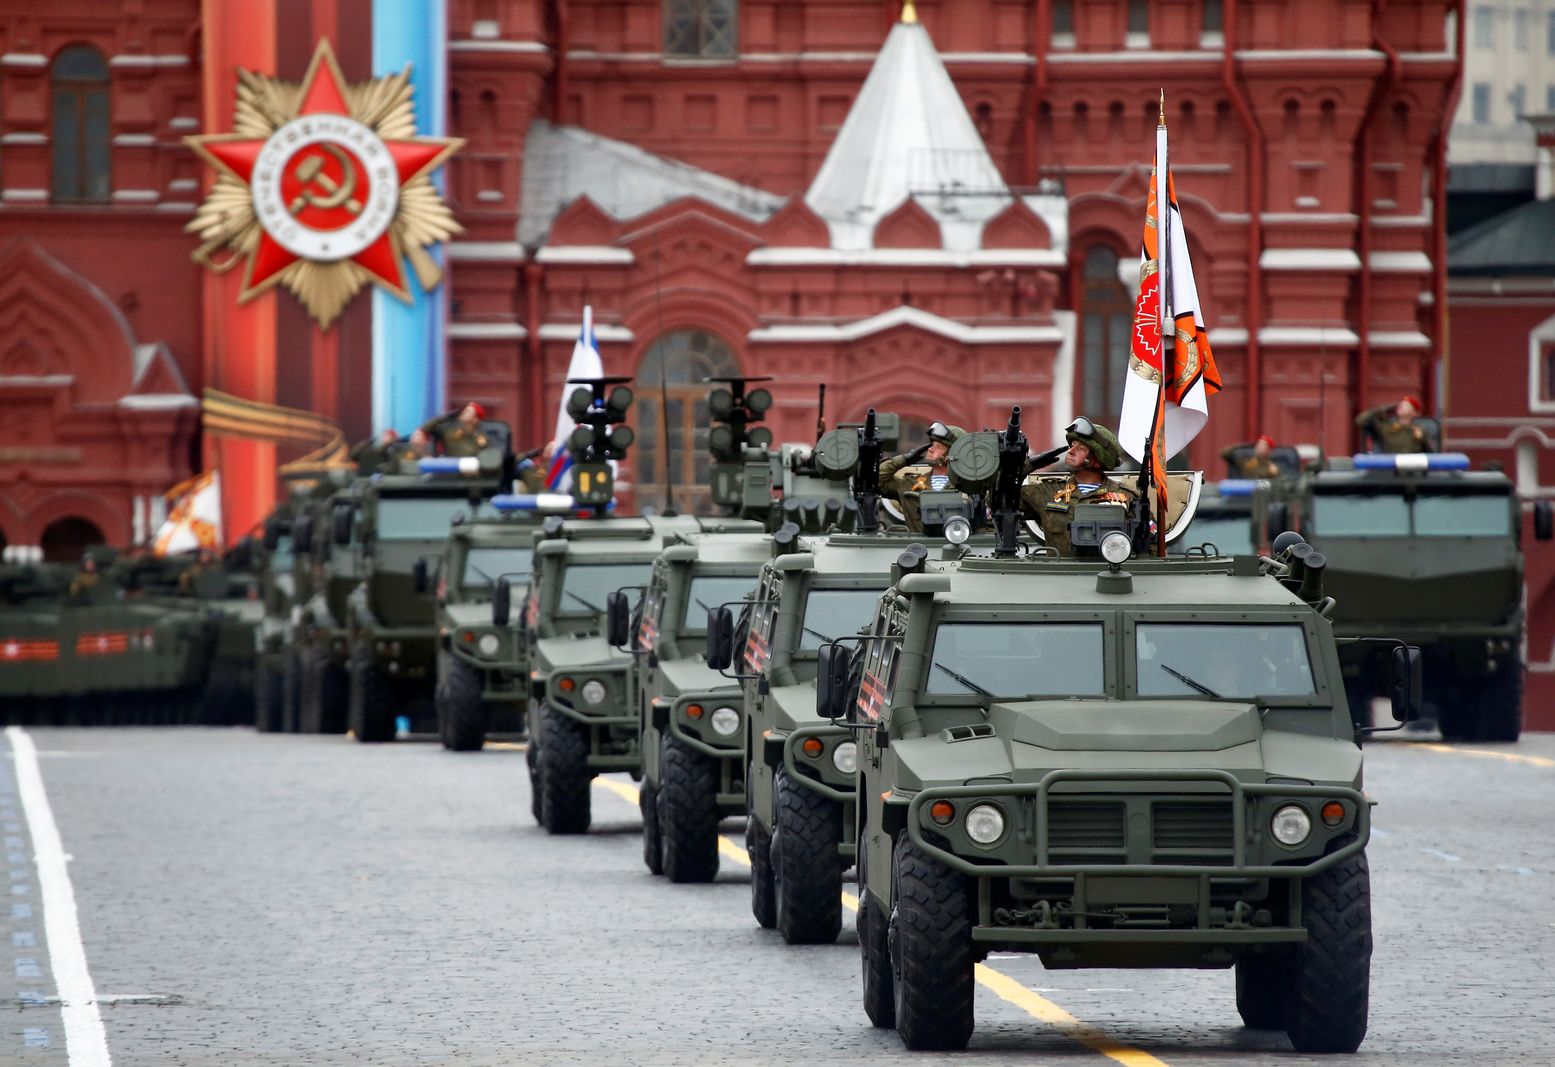 Russia Has “Tiger” Armored Cars, But How Good are They? | The National Interest